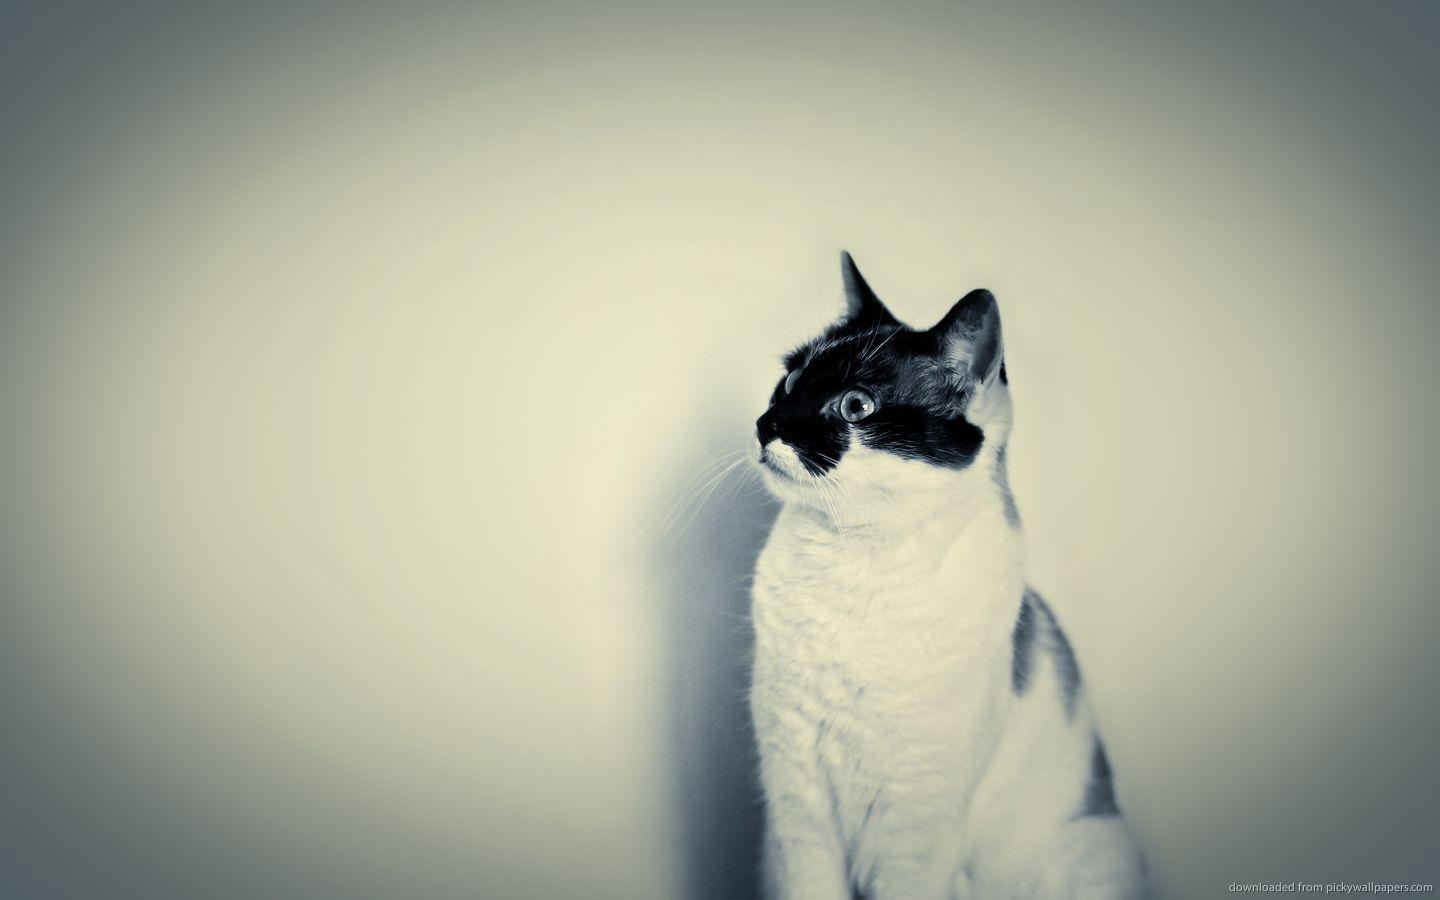 Download Hipster Cat Photo background: hipster wallpaper hipster